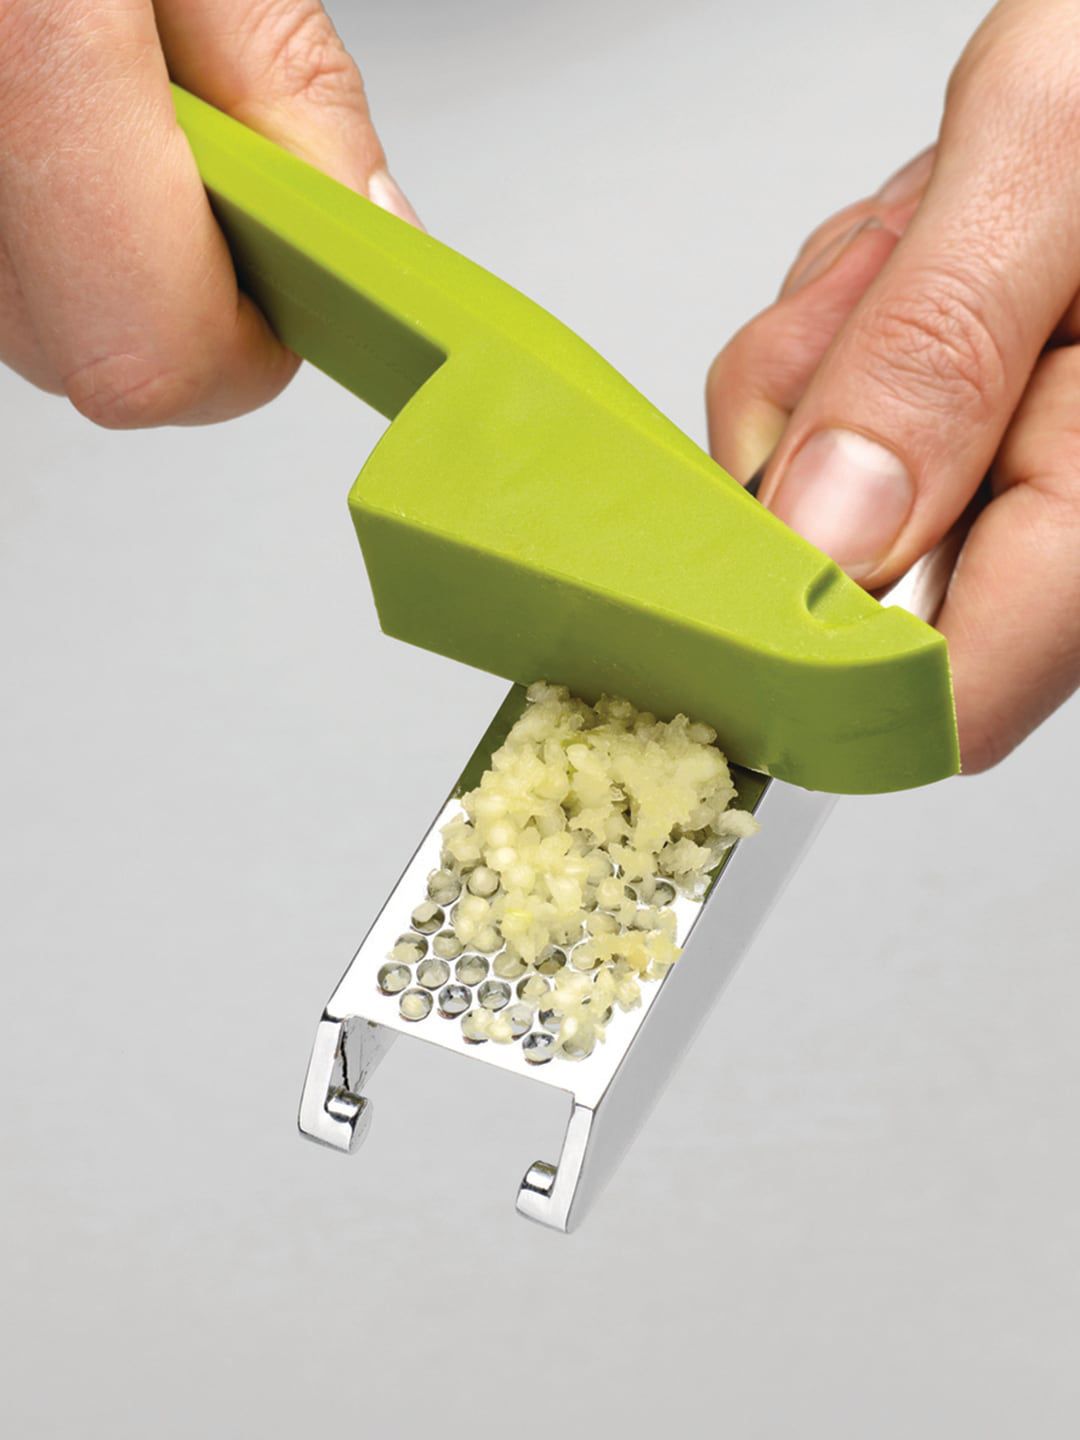 Joseph Joseph Green & Silver-Toned Solid Stainless Steel Clean Press Garlic Crusher Price in India